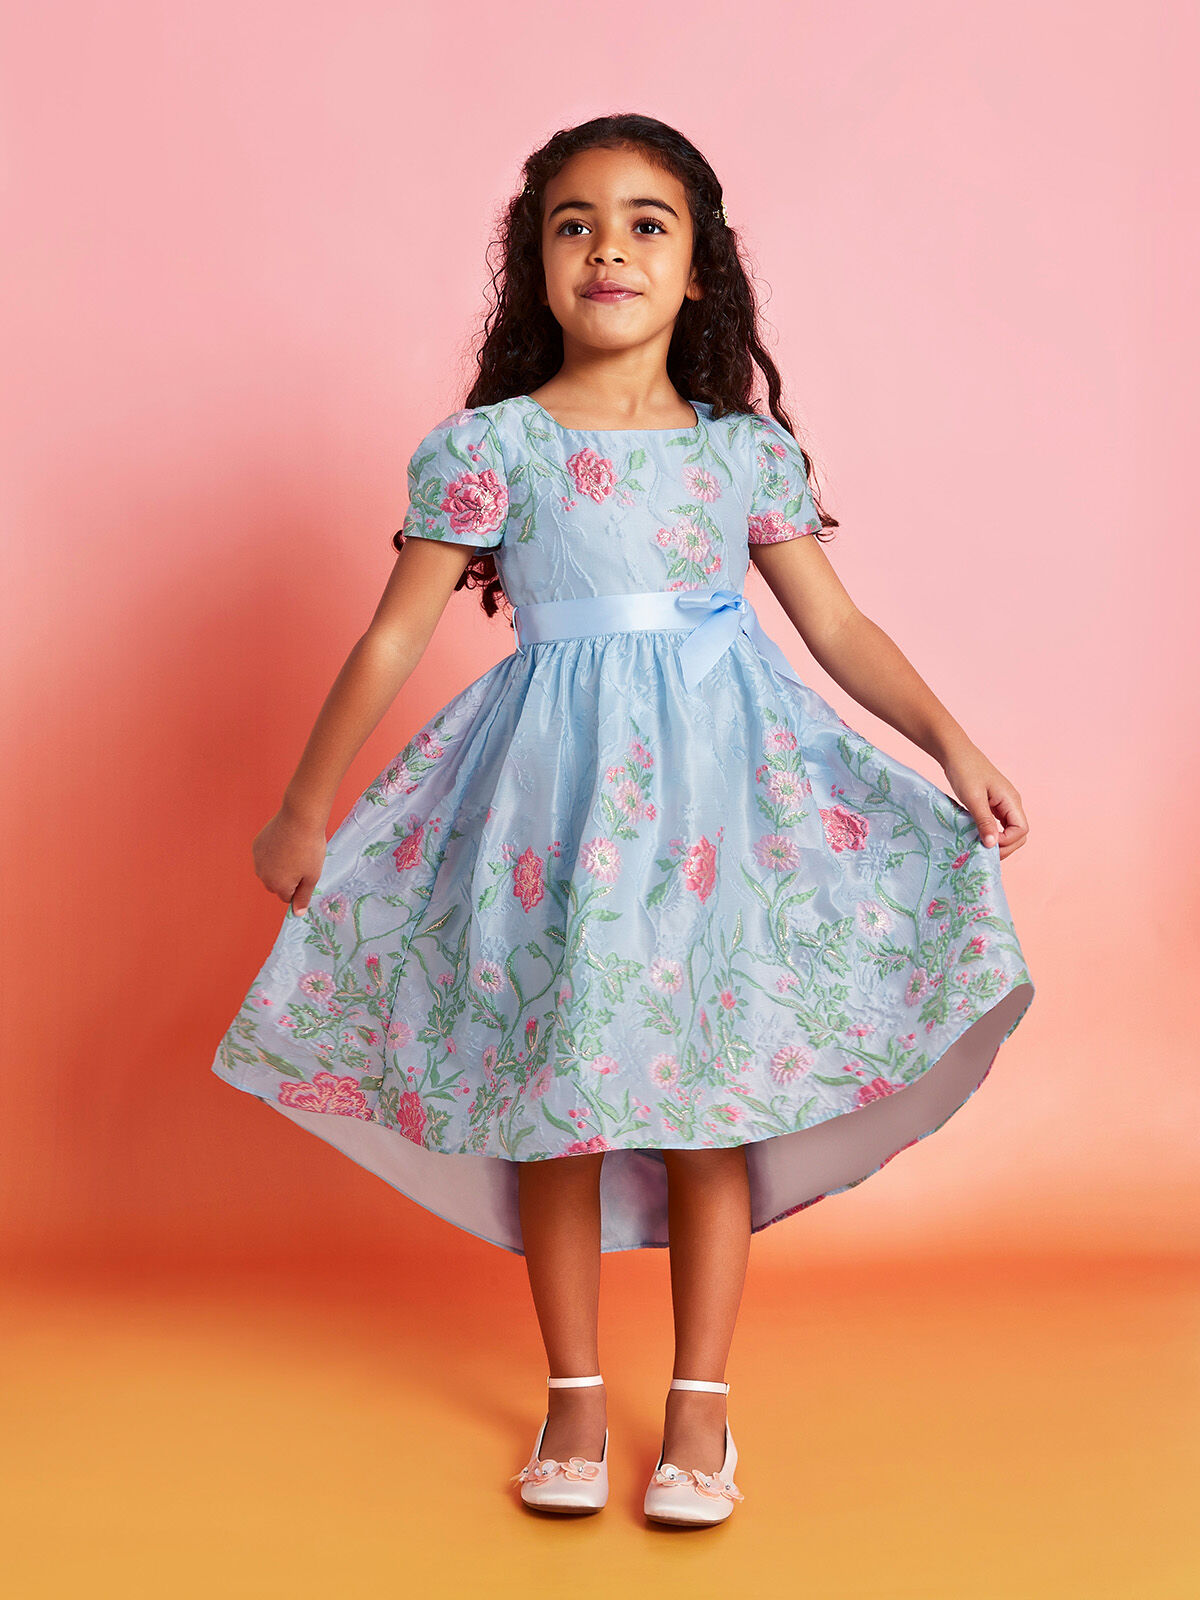 Plus Size Girls Dresses That Actually Fit – Kid's Dream